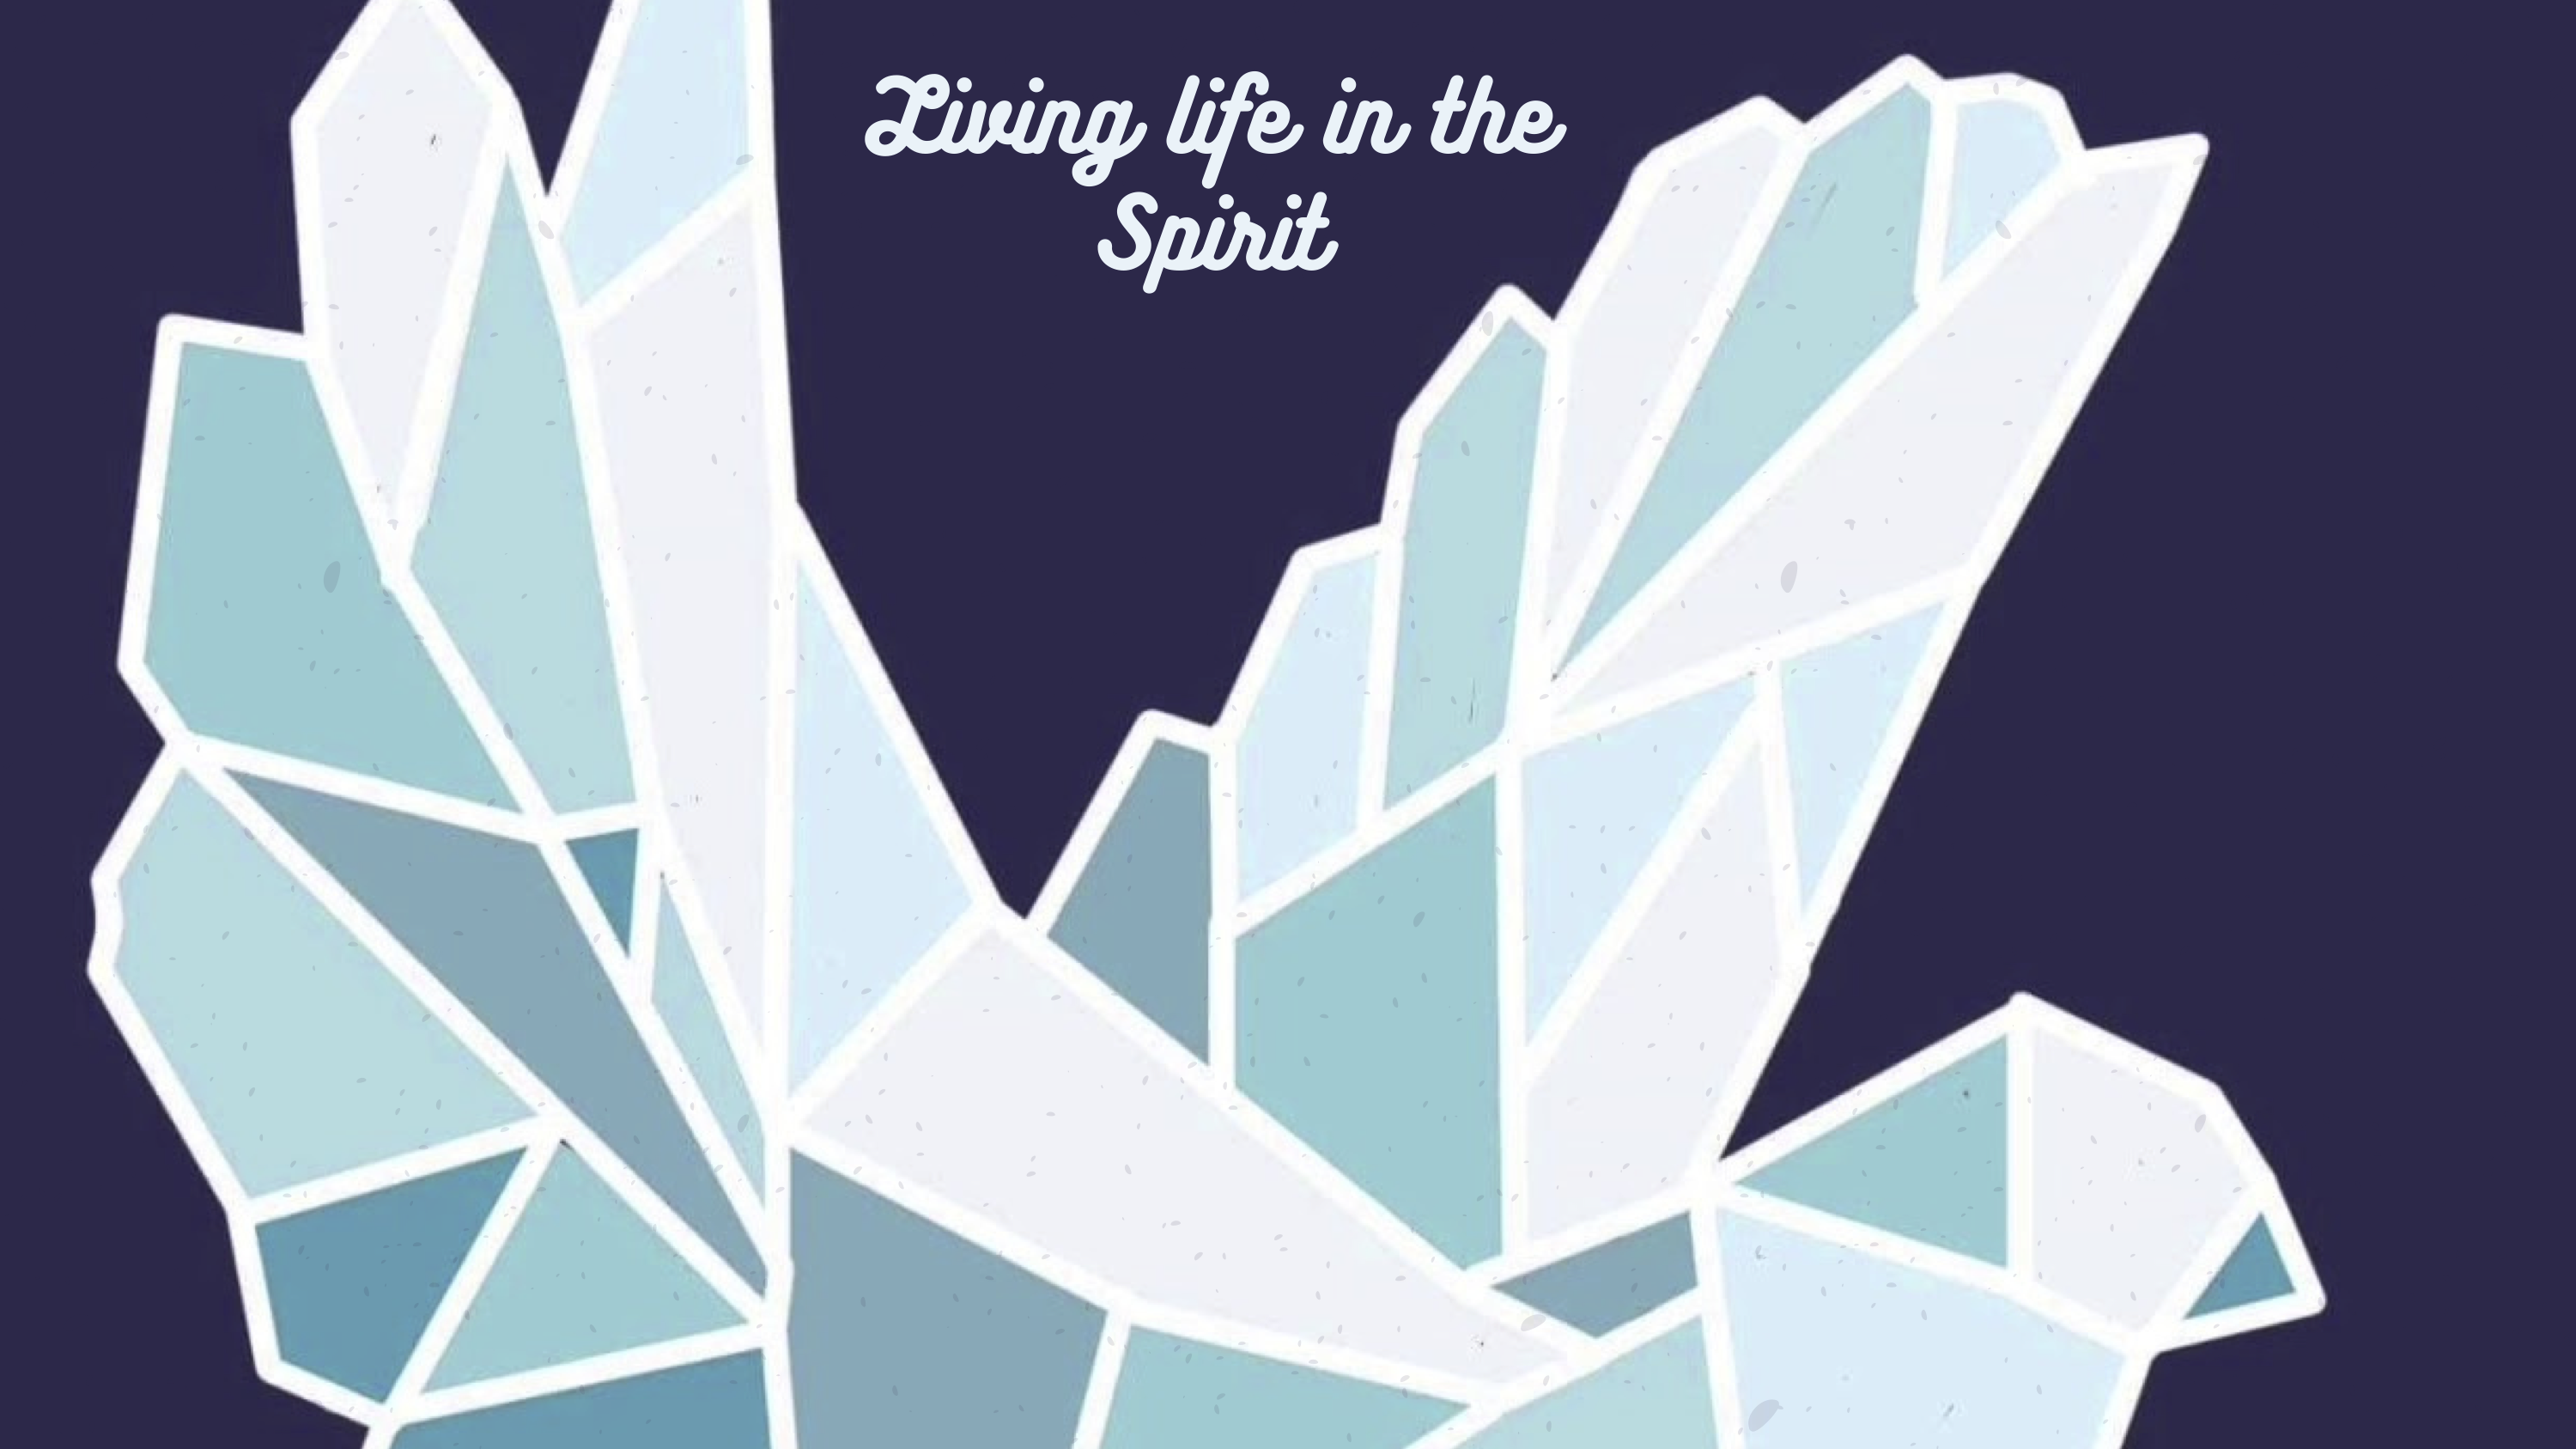 Geometric image of a dove with the words Living Life in the Spirit above it.